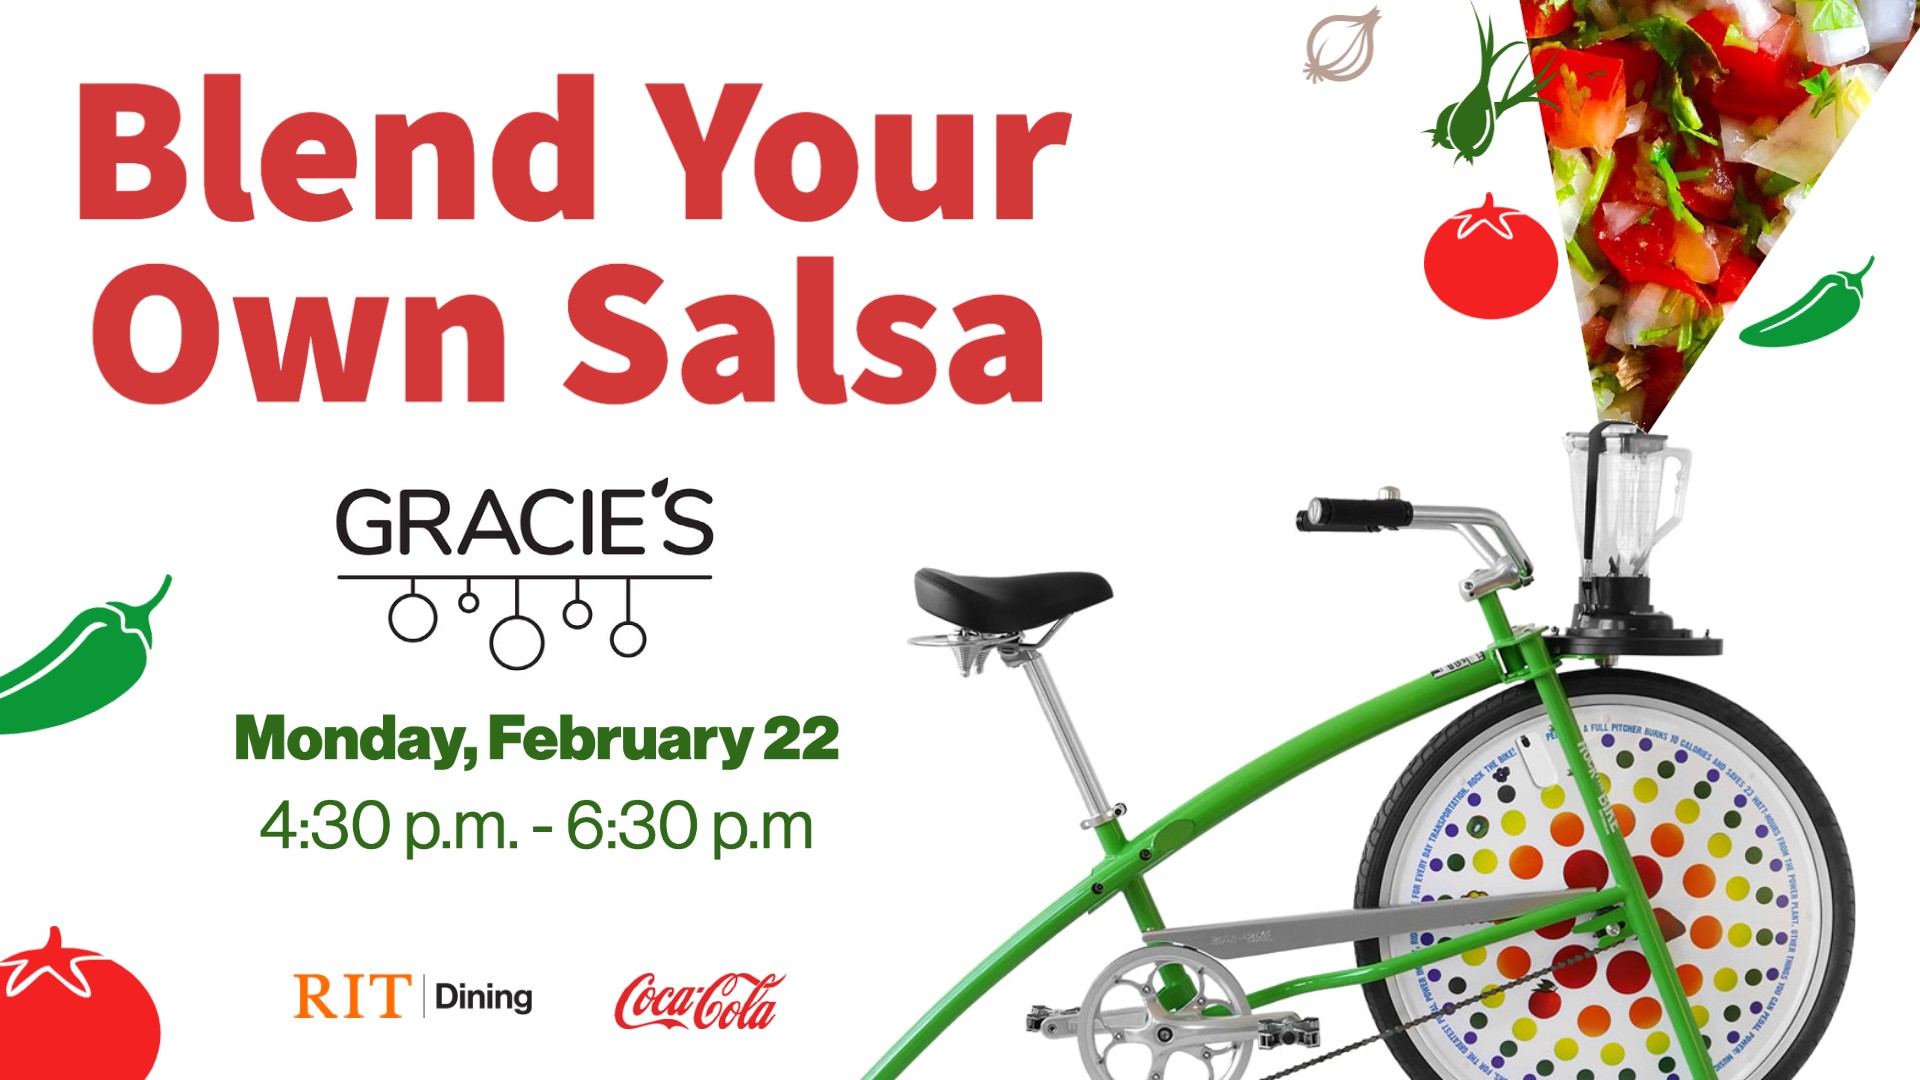 white background with a blender bike and salsa ingredients. Text reads "blend your own salsa", Gracie's logo, and Monday, February 22"